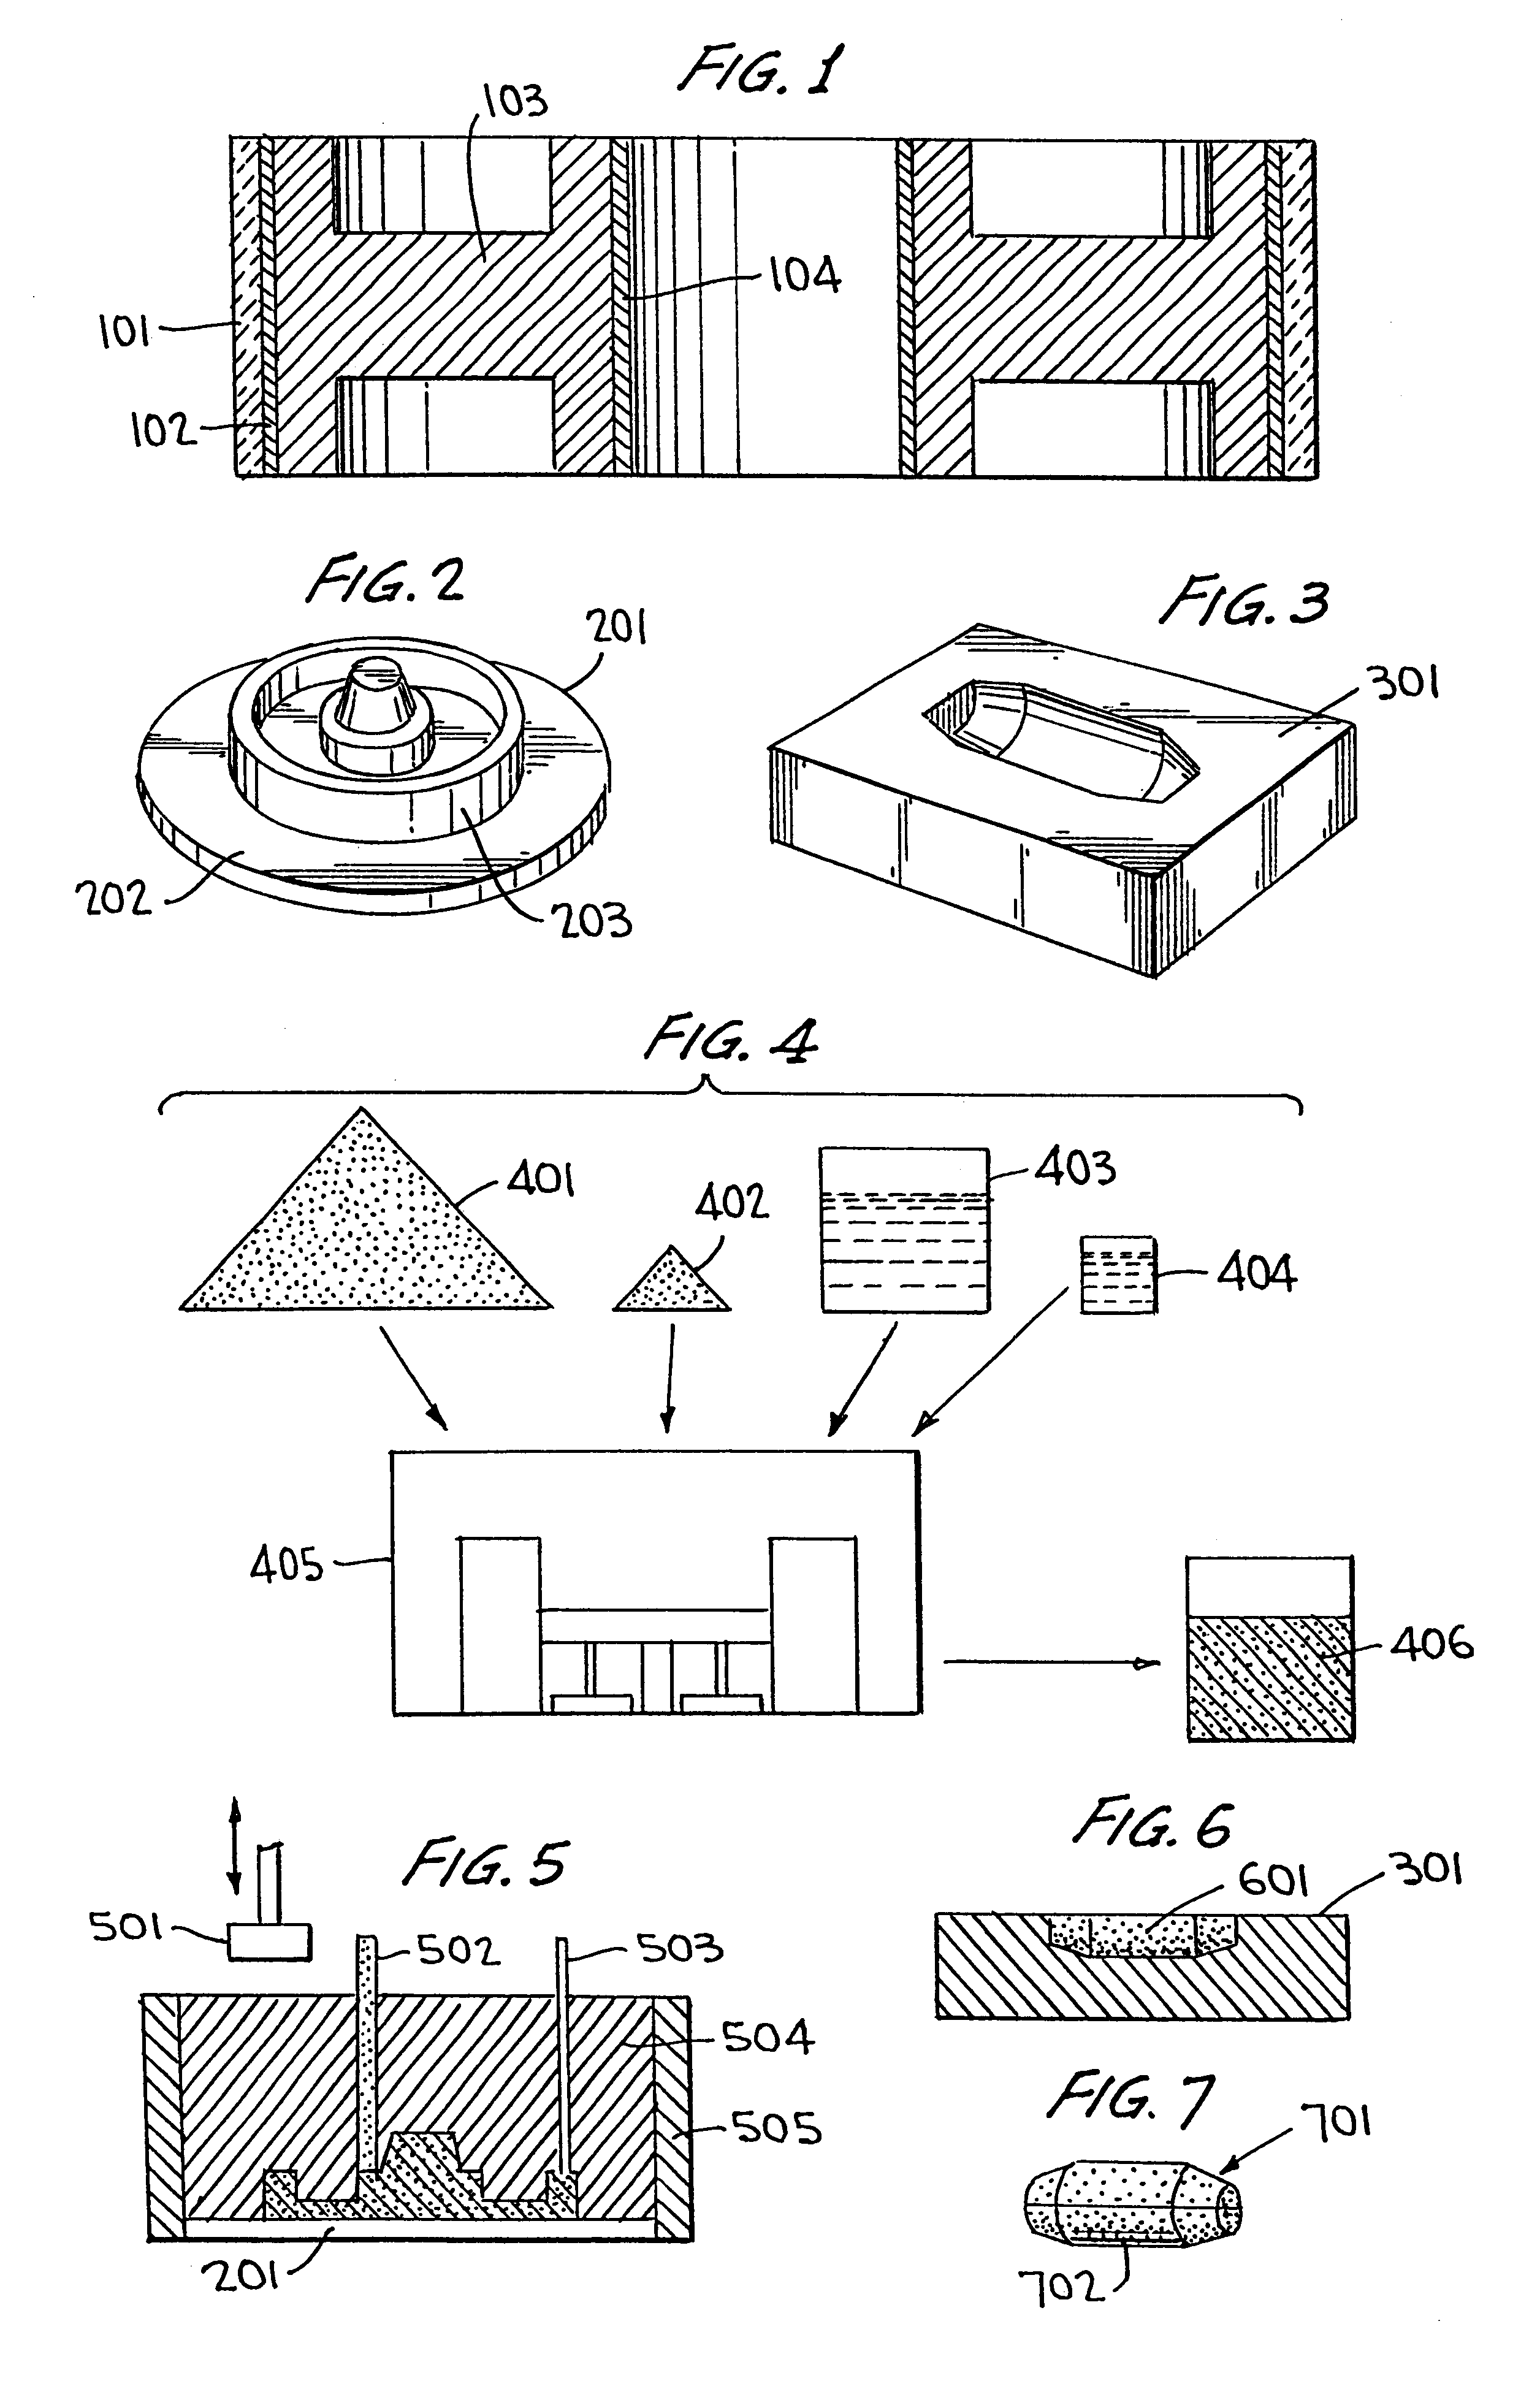 Method for manufacturing high performance components